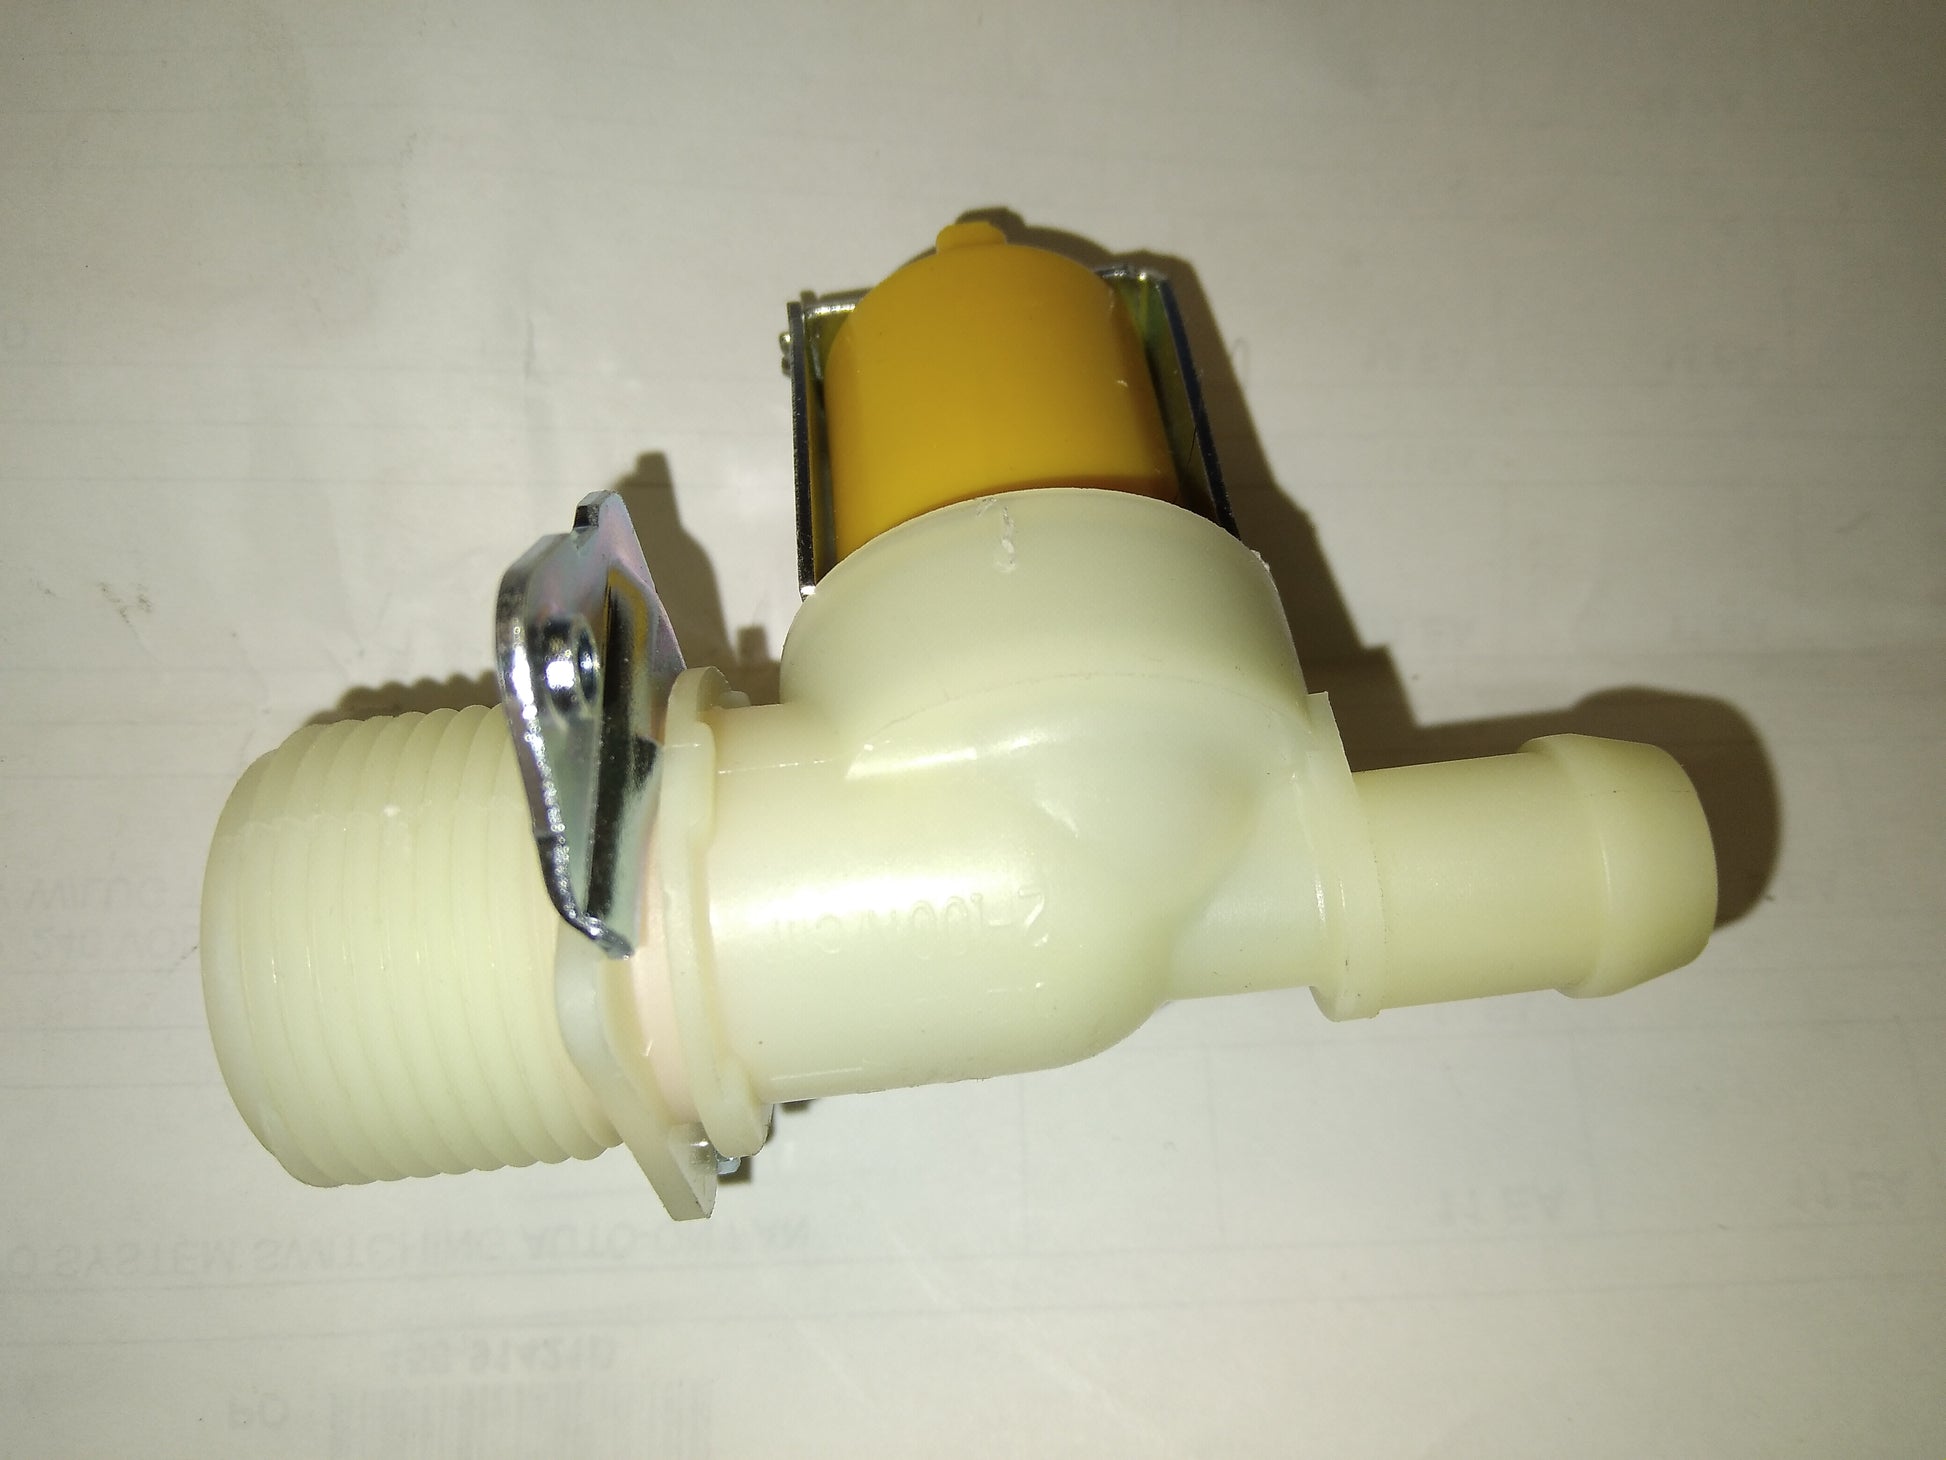 REPLACEMENT FILL VALVE FOR ELECTRODE STEAM HUMIDIFIERS 